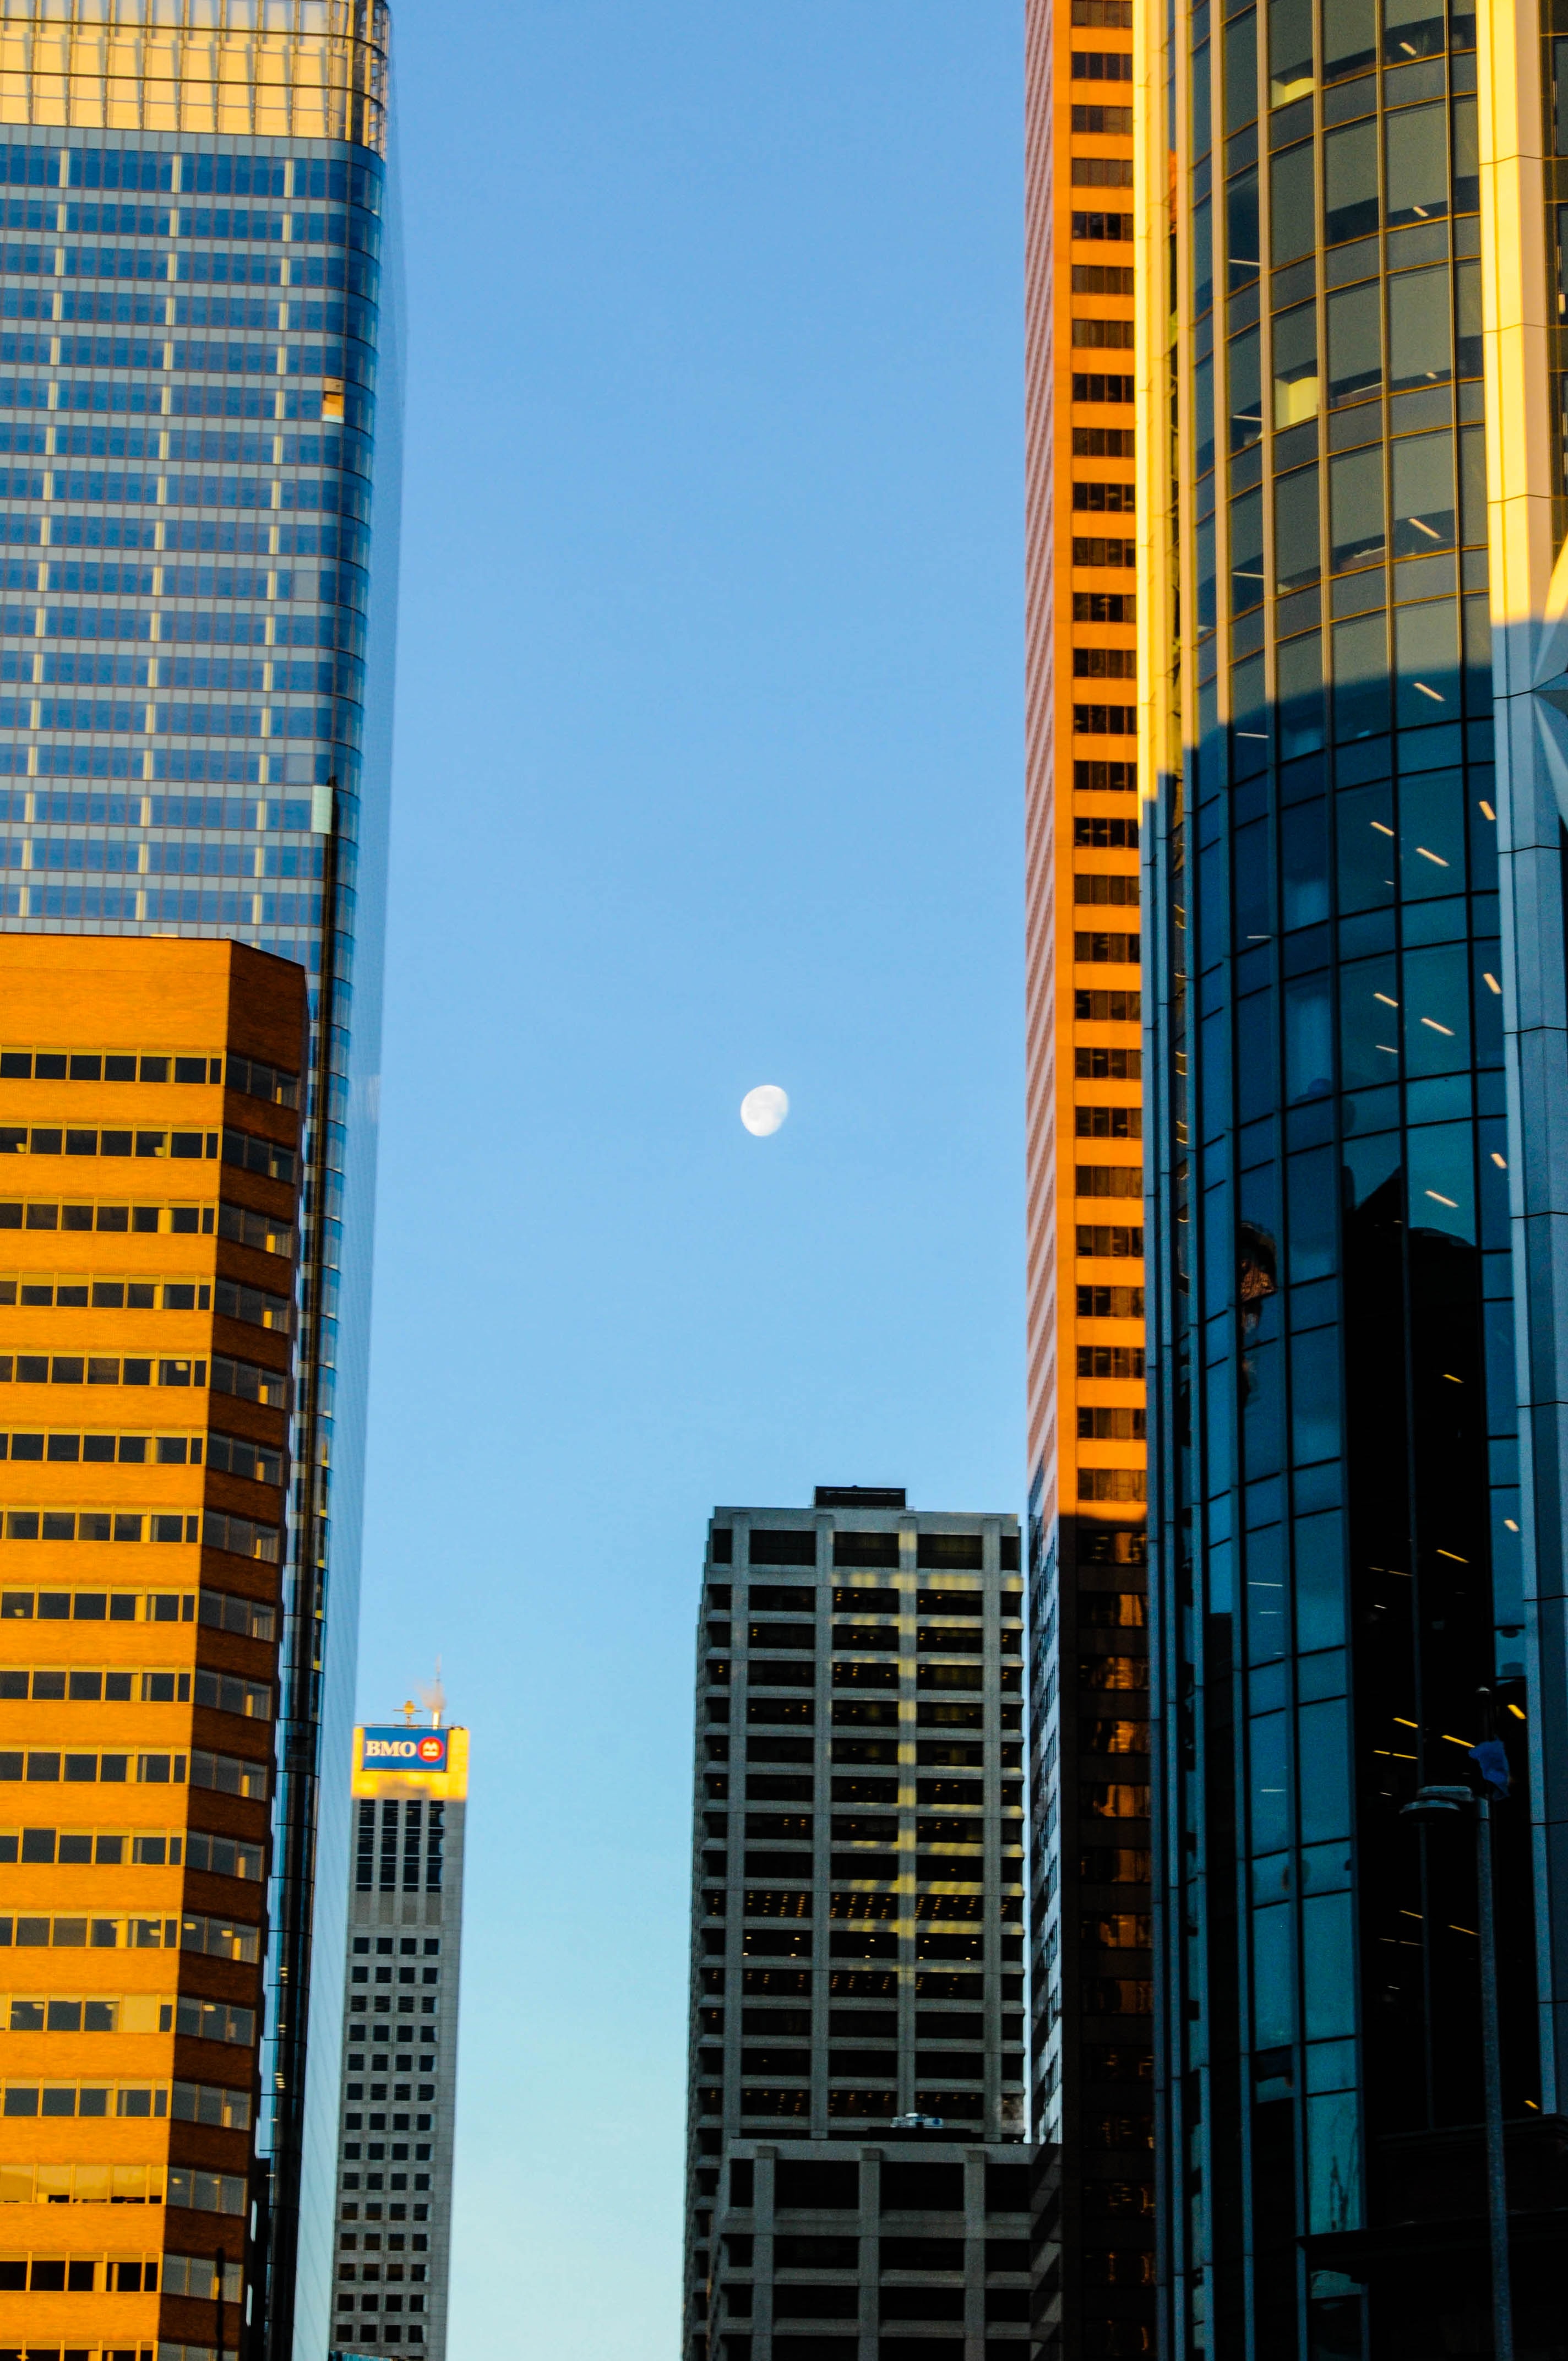 architecture, cities, moon, city, building, skyscrapers